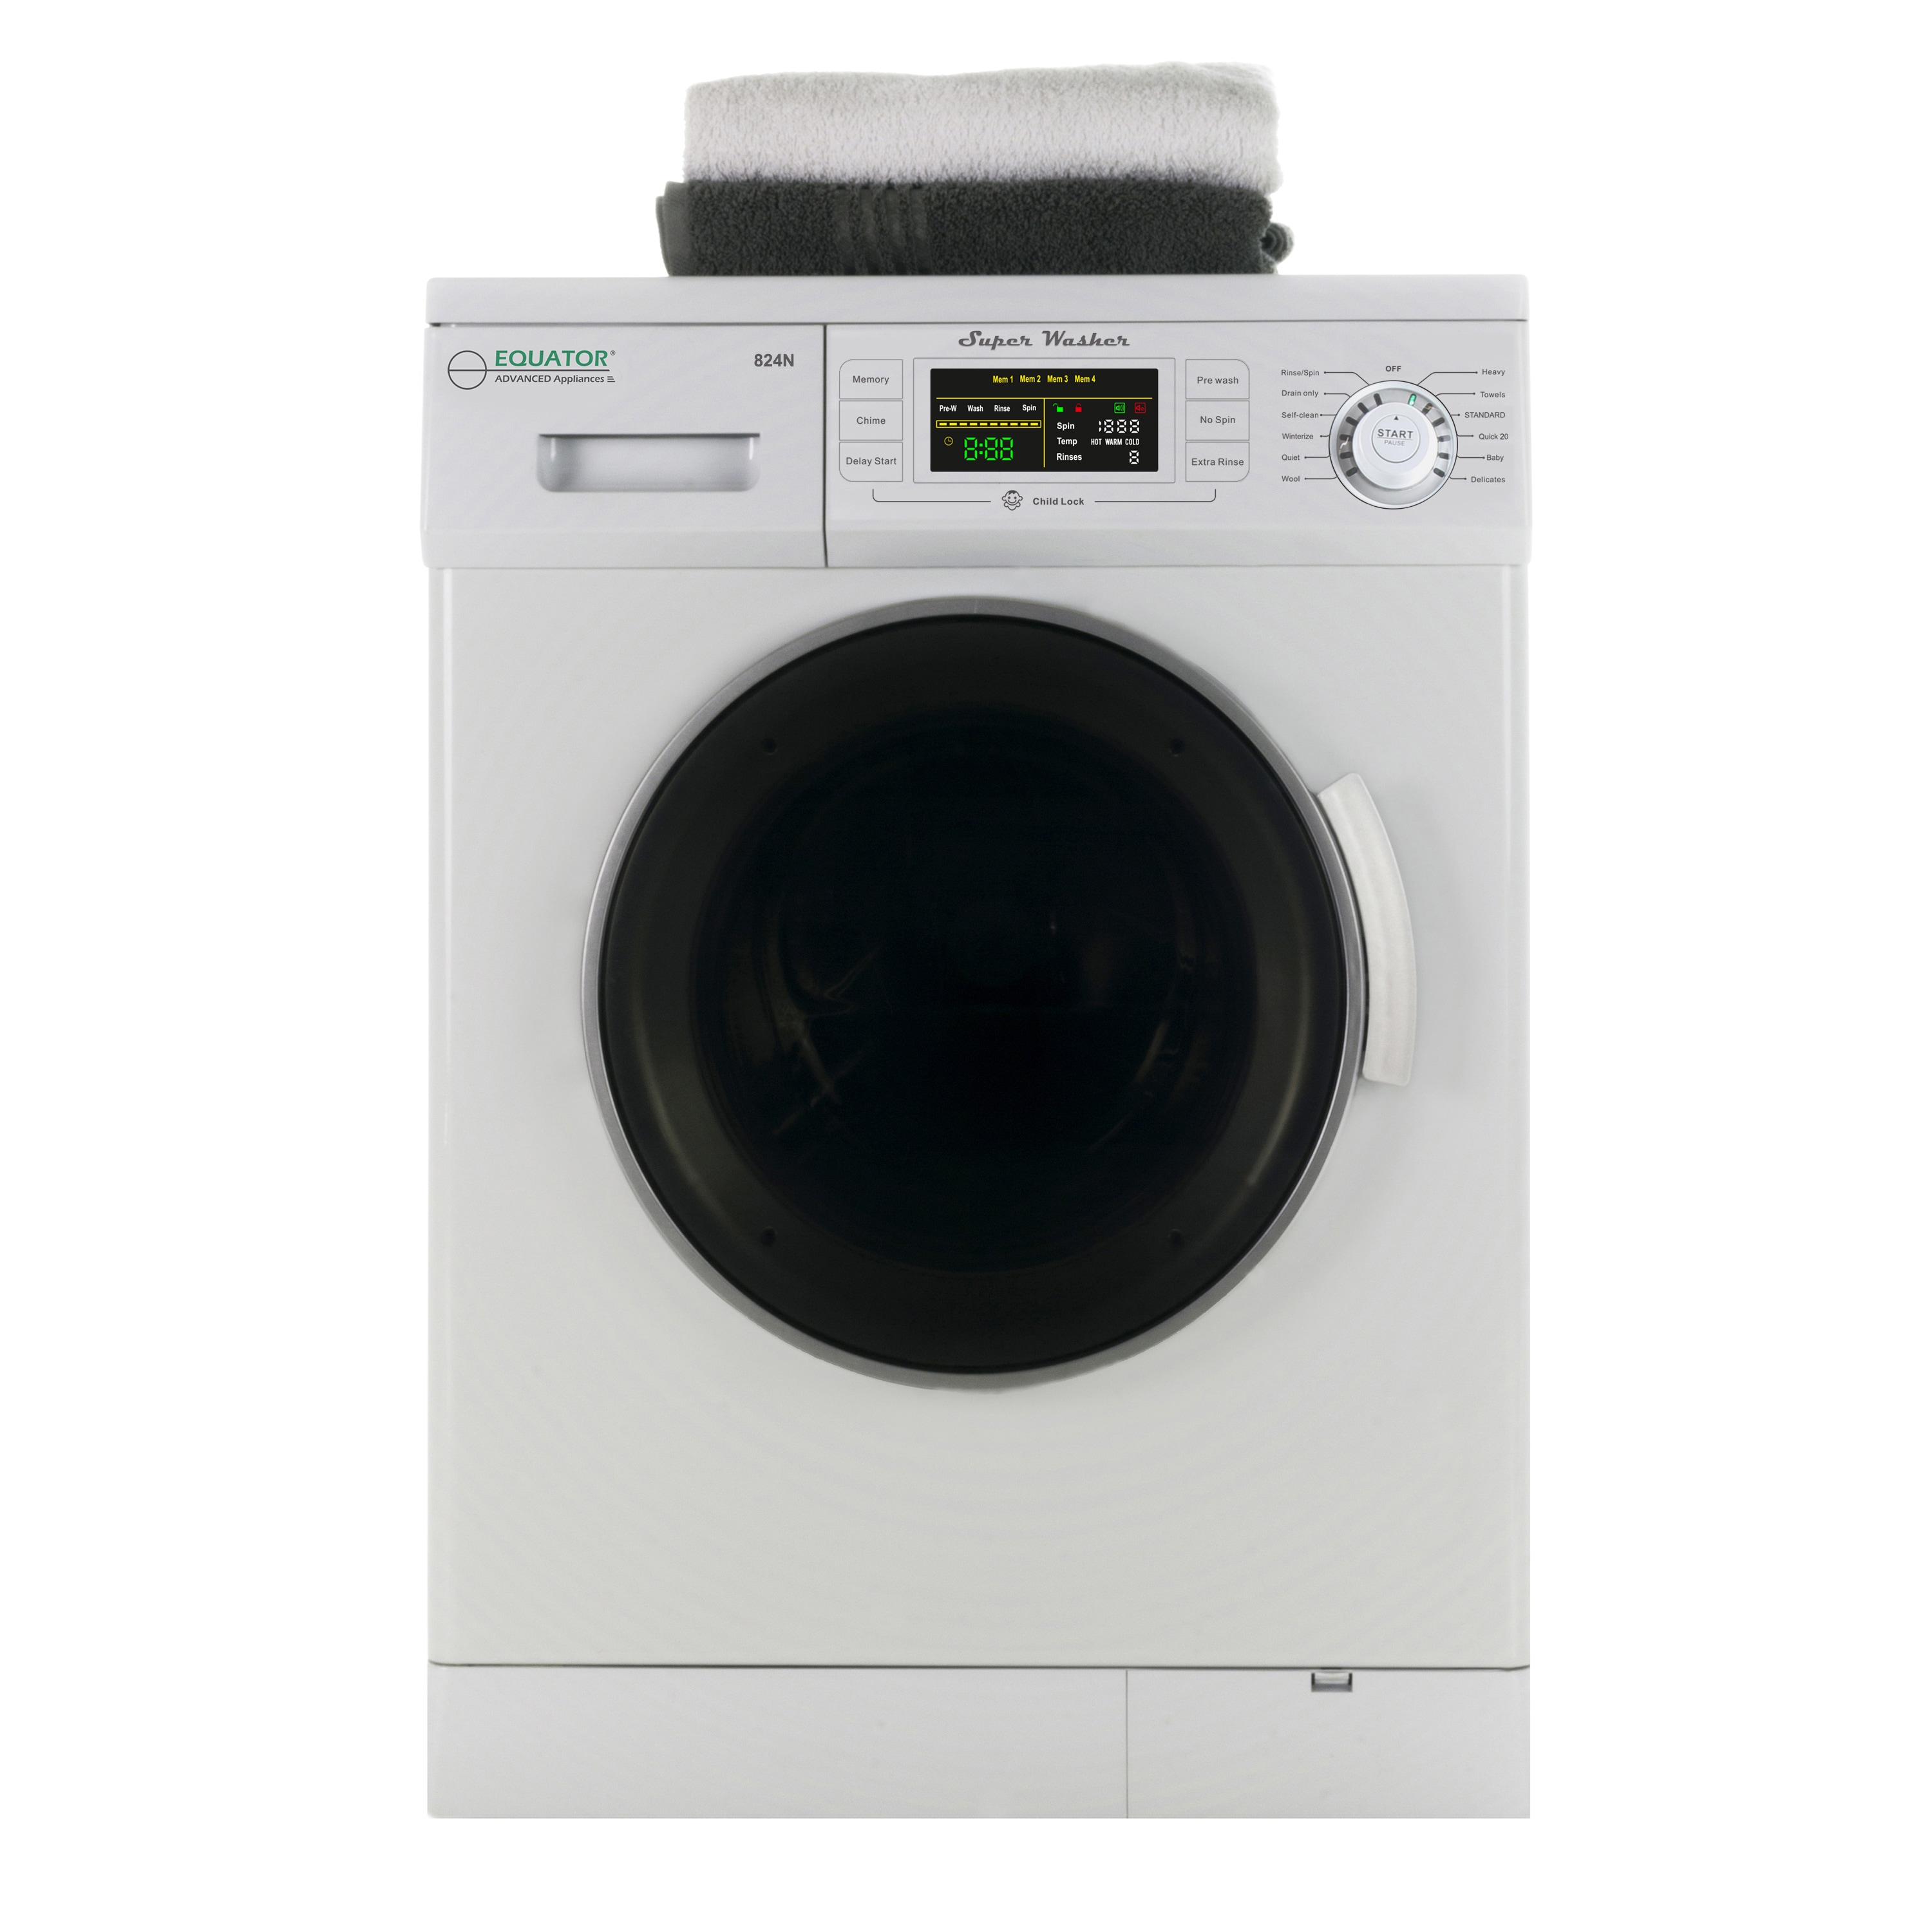 equator-advanced-appliances-stackable-washing-machines-at-lowes